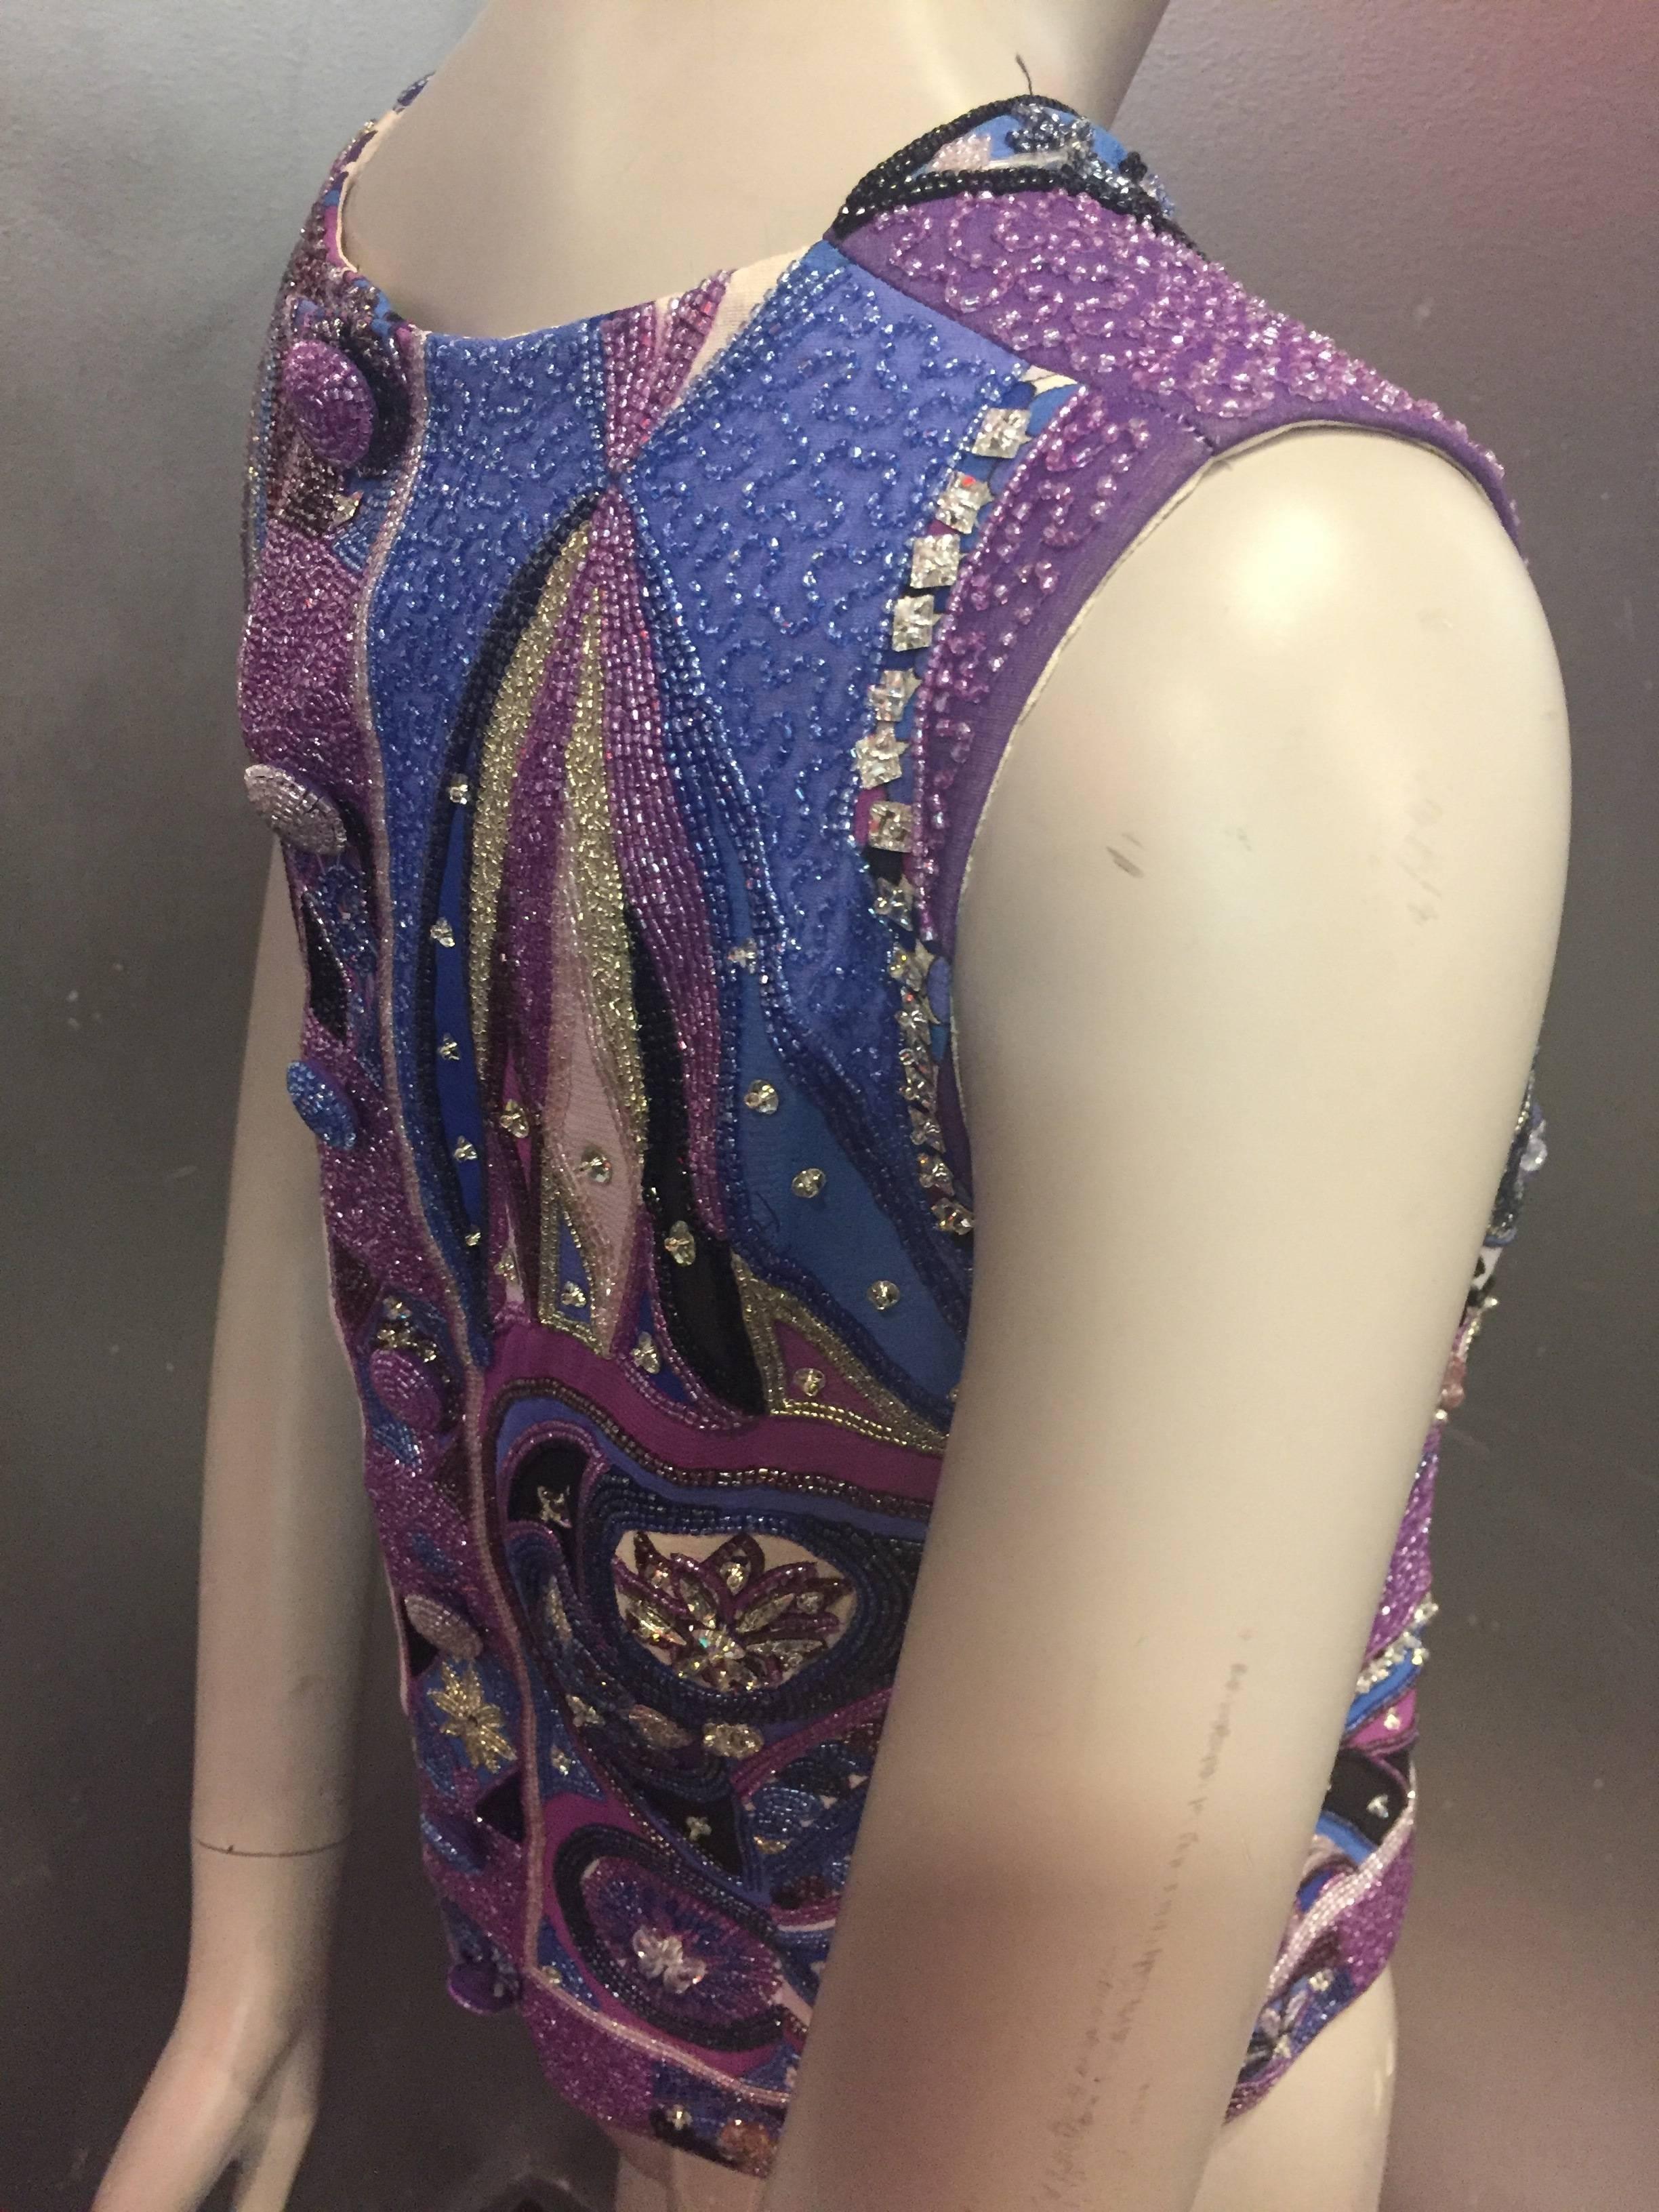 Women's 1960s Emilio Pucci Beaded and Embellished Print Top w Back Buttons